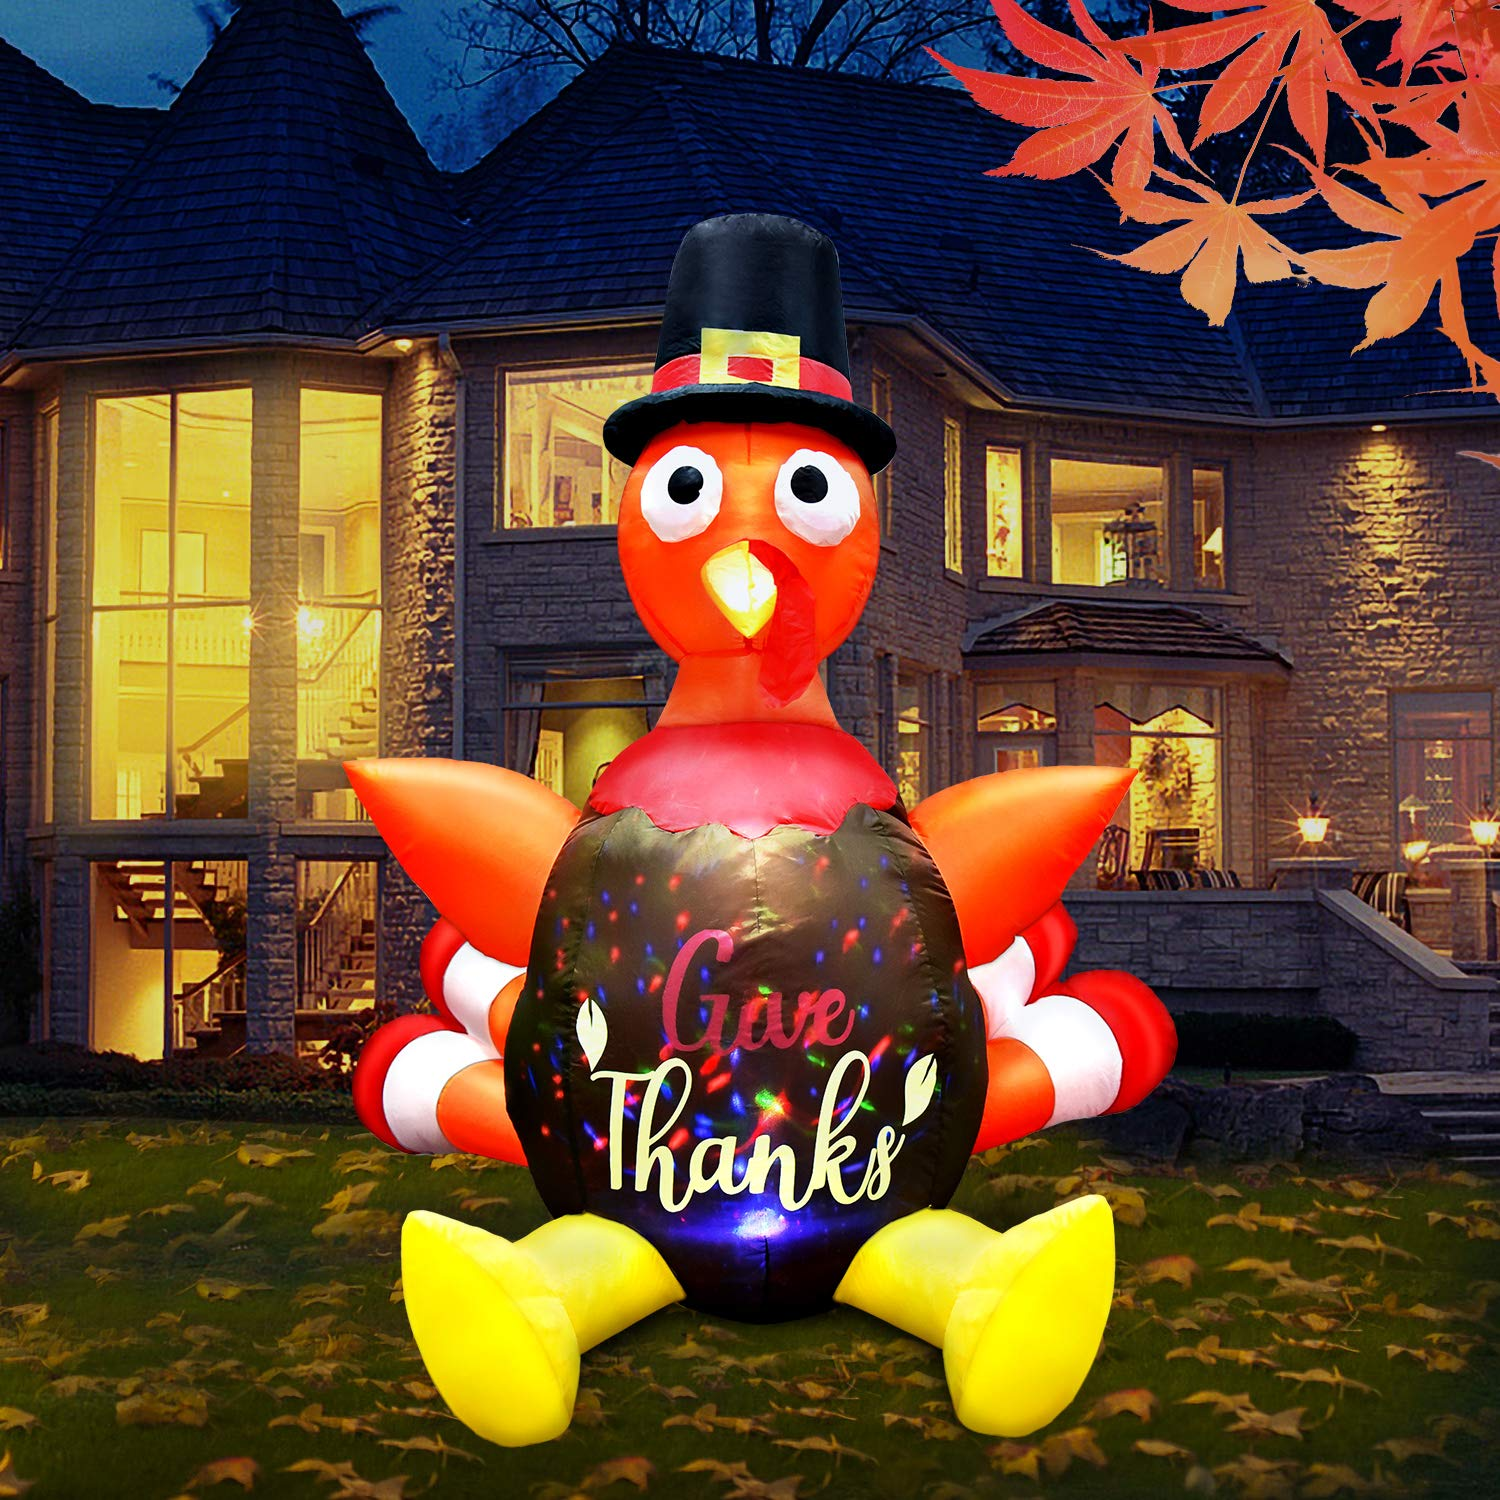 5FT Thanksgiving Inflatable Turkey with Pilgrim Hat, Built-in Rotating LED Colorful Lights Thanksgiving Autumn Decor, Blow up Lighted Outdoor Indoor Holiday Yard Lawn Decoration